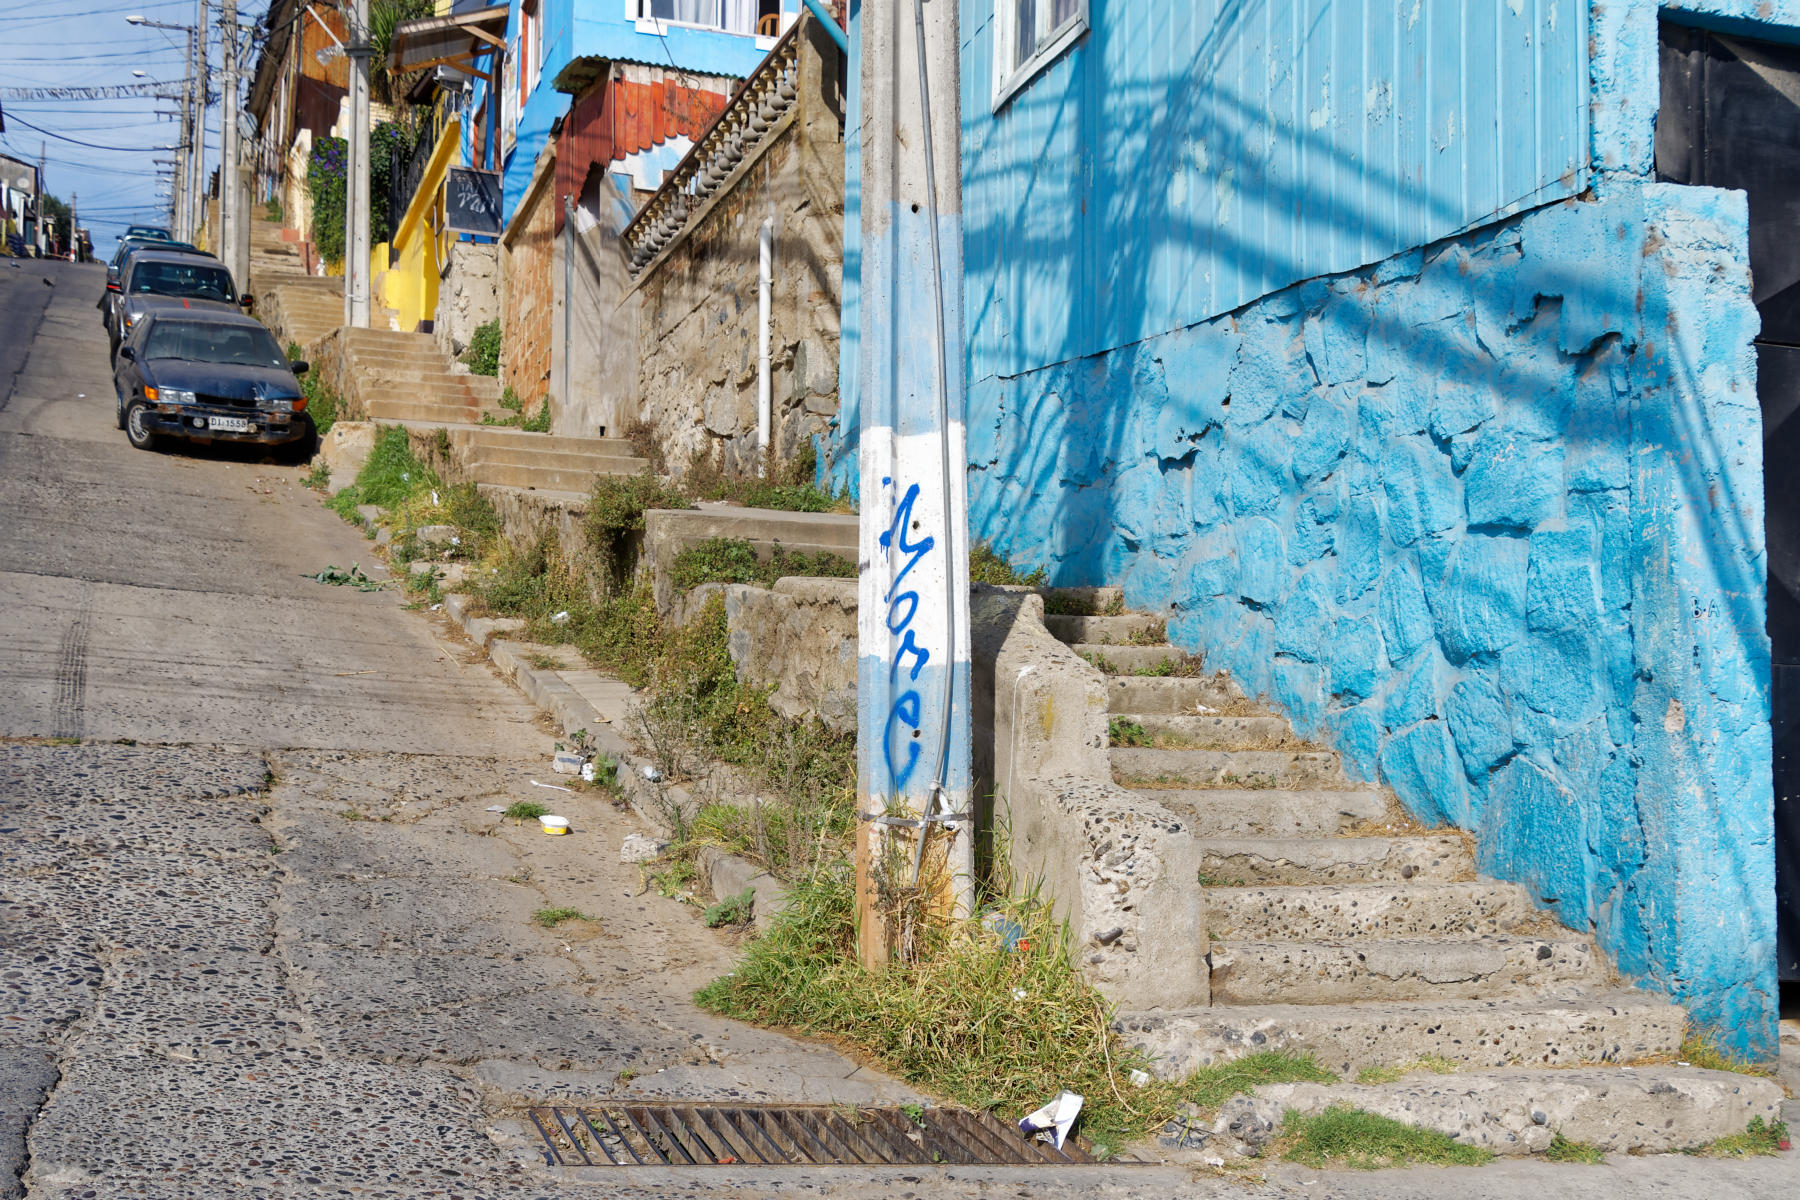 The colourful streets of Valparaiso